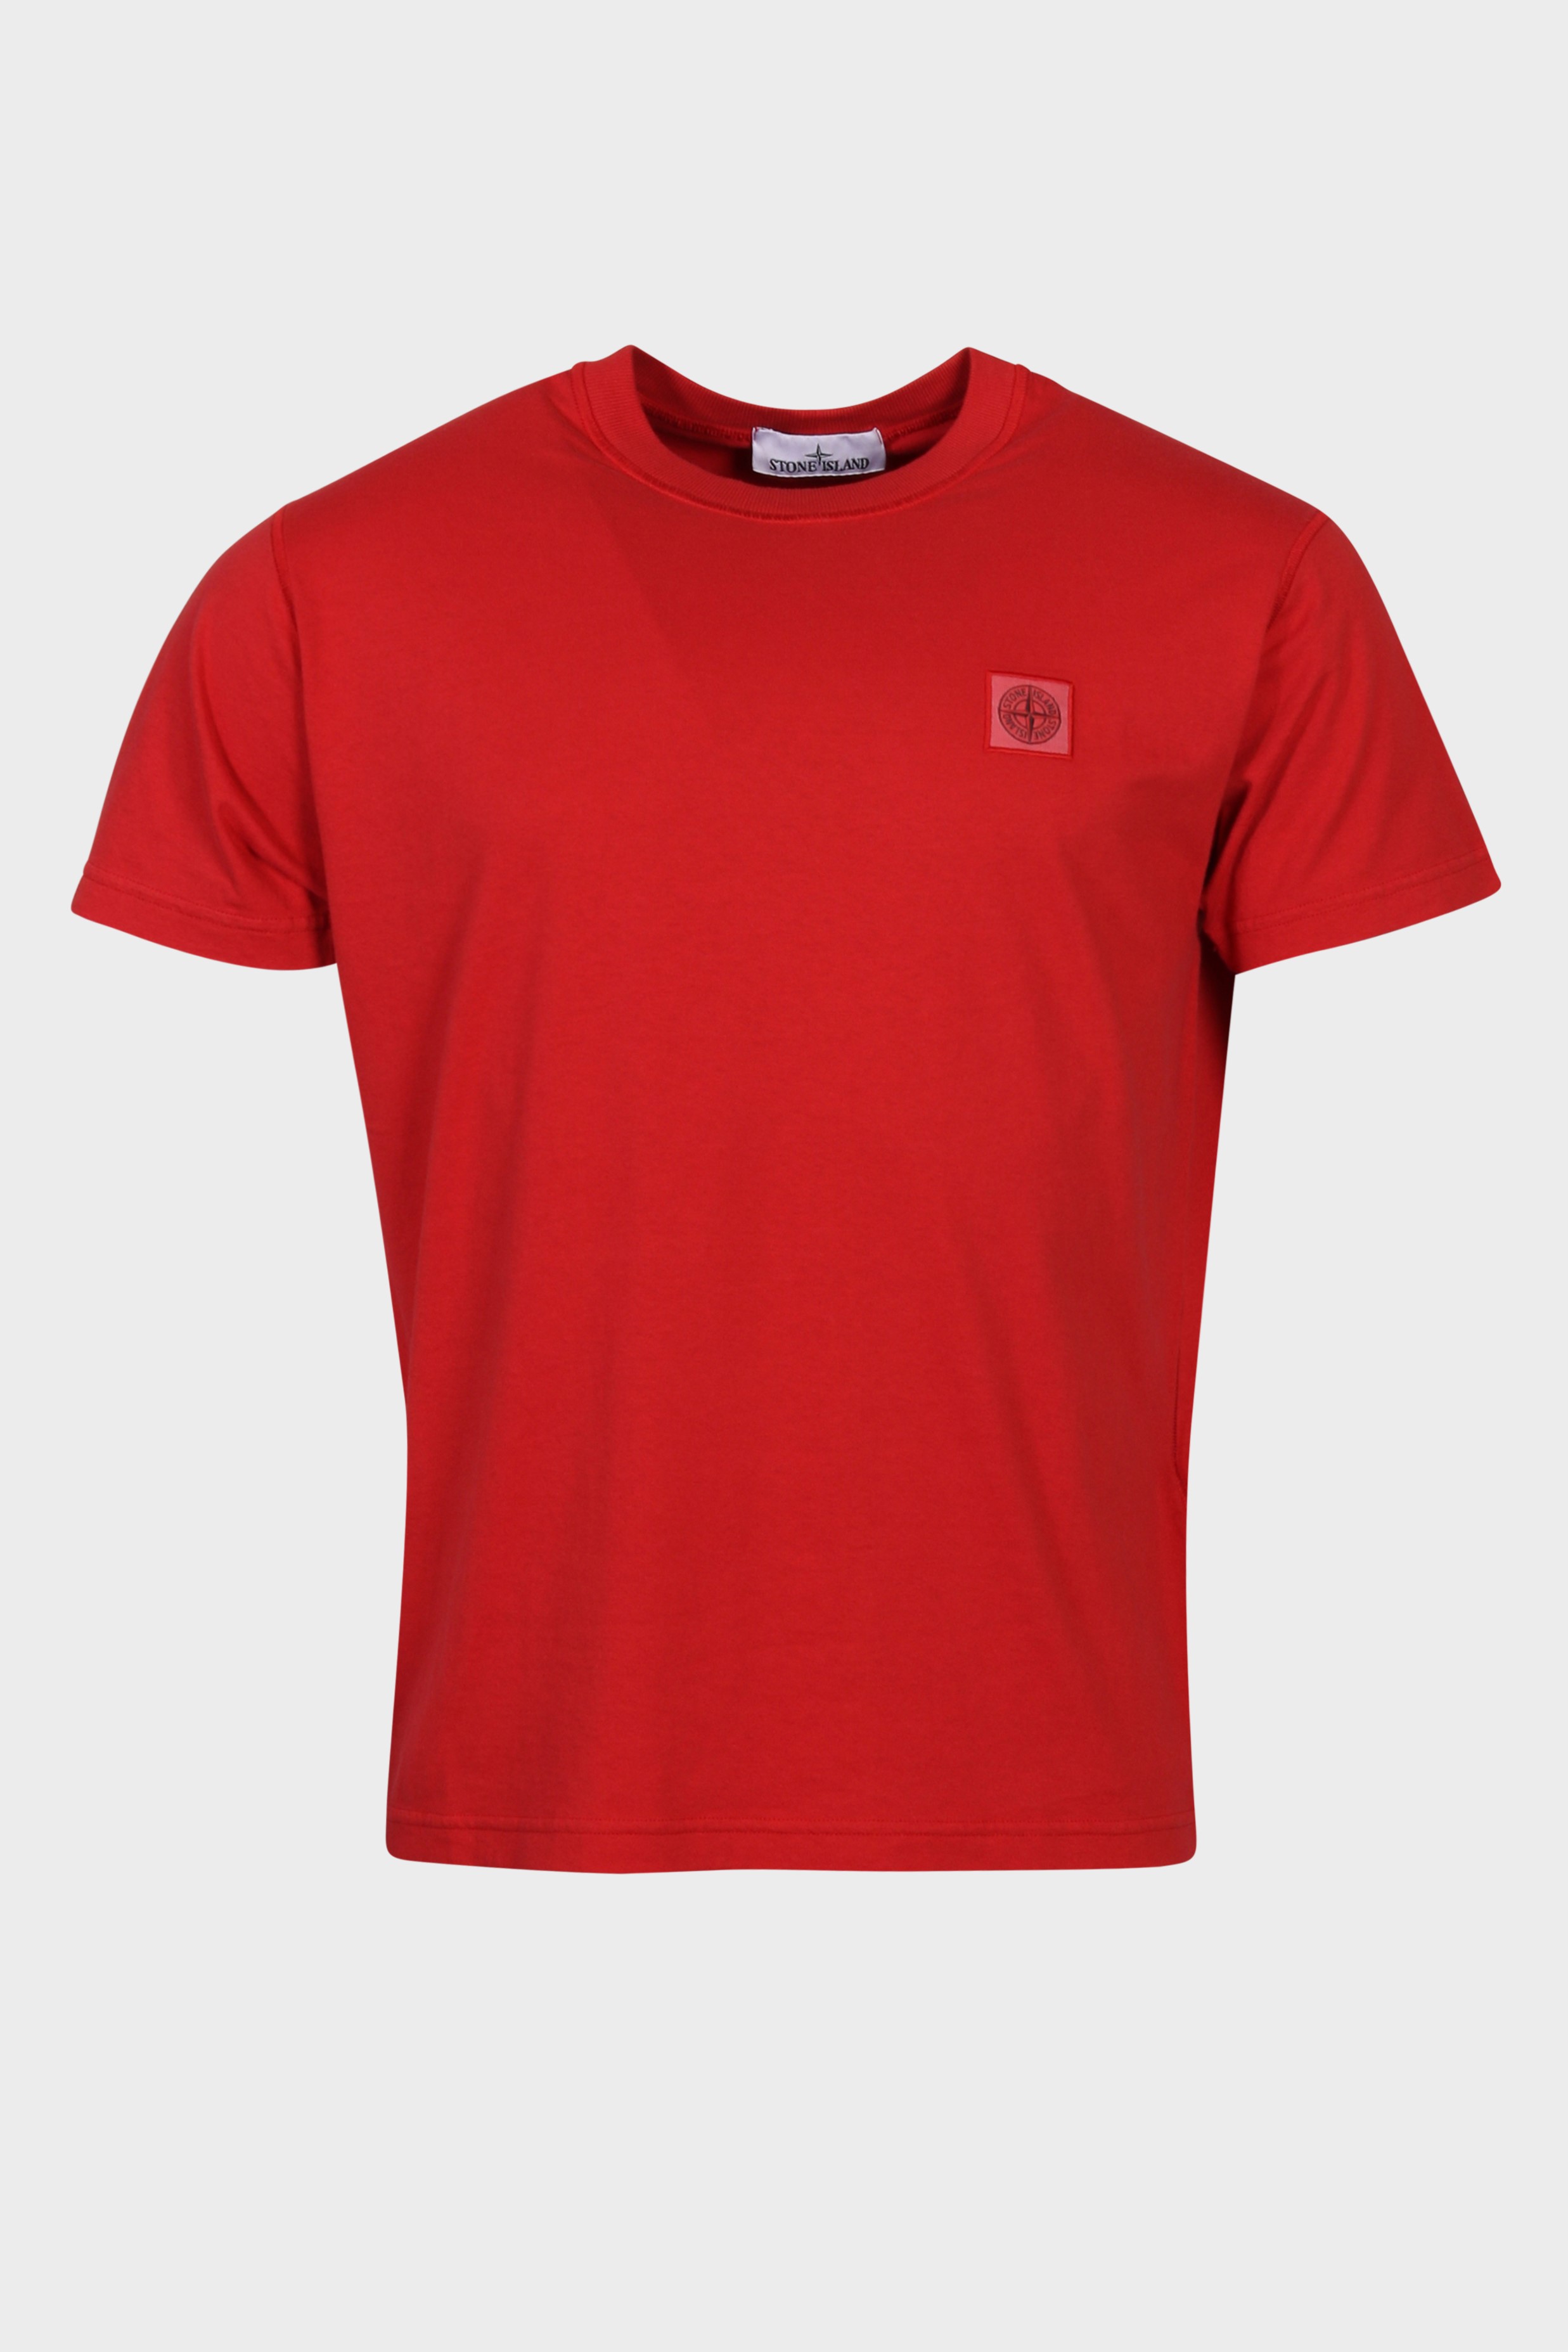 STONE ISLAND T-Shirt in Red 2XL